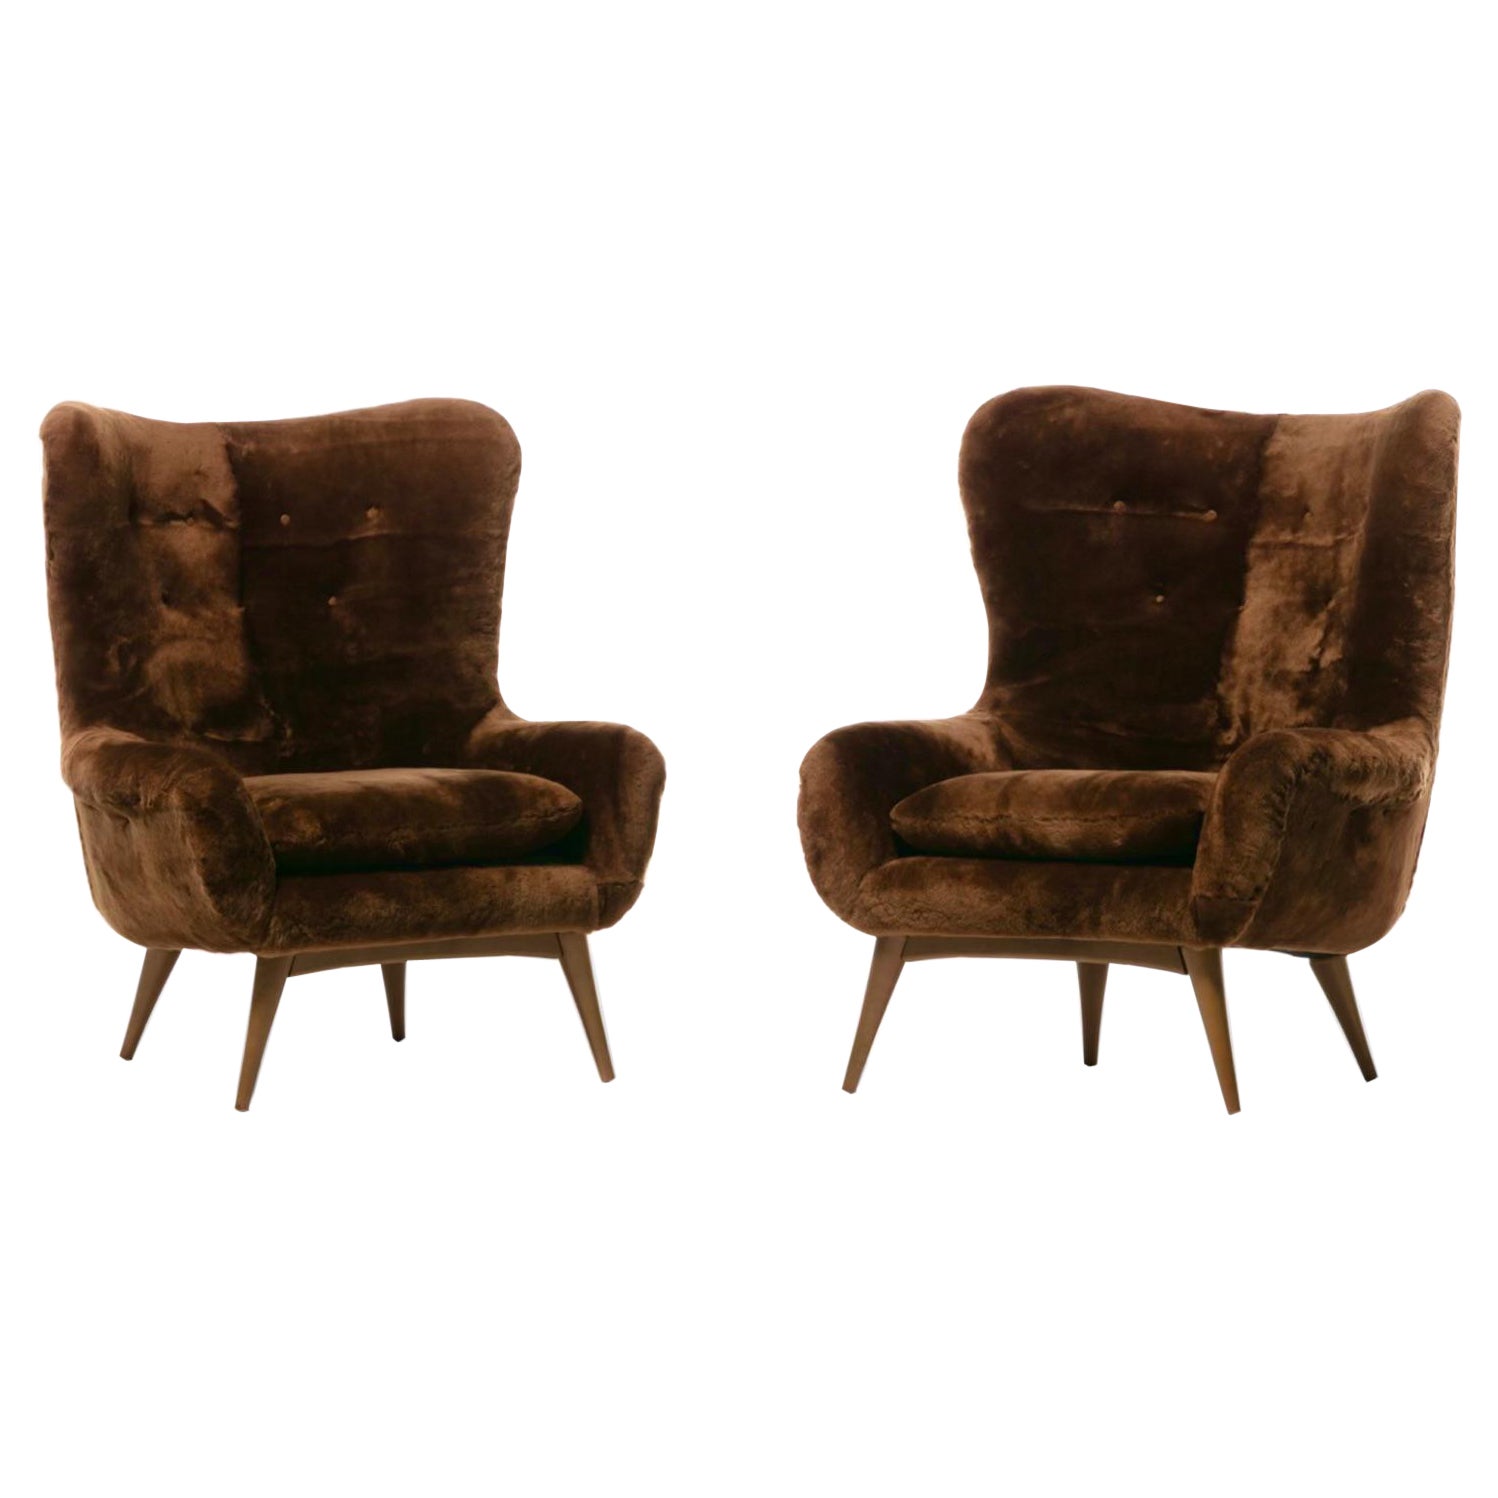 Karpen Wingback Chairs in Luxuriously Soft Milk Chocolate Shearling, circa 1950s For Sale